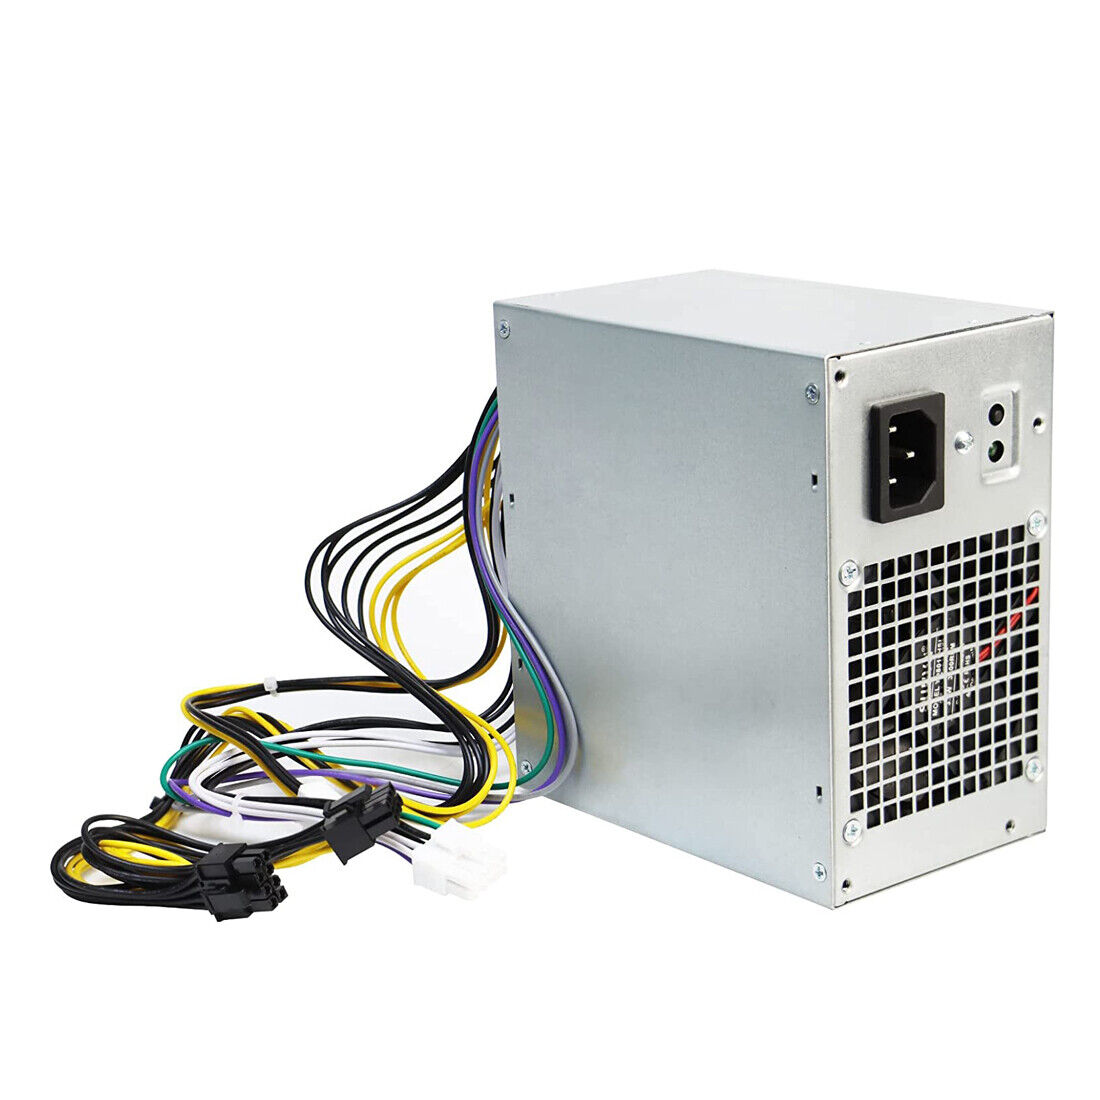 New HK465-11PP T1M43 365W Power Supply Fit DELL Precision 3620 T3620 T1700 T20